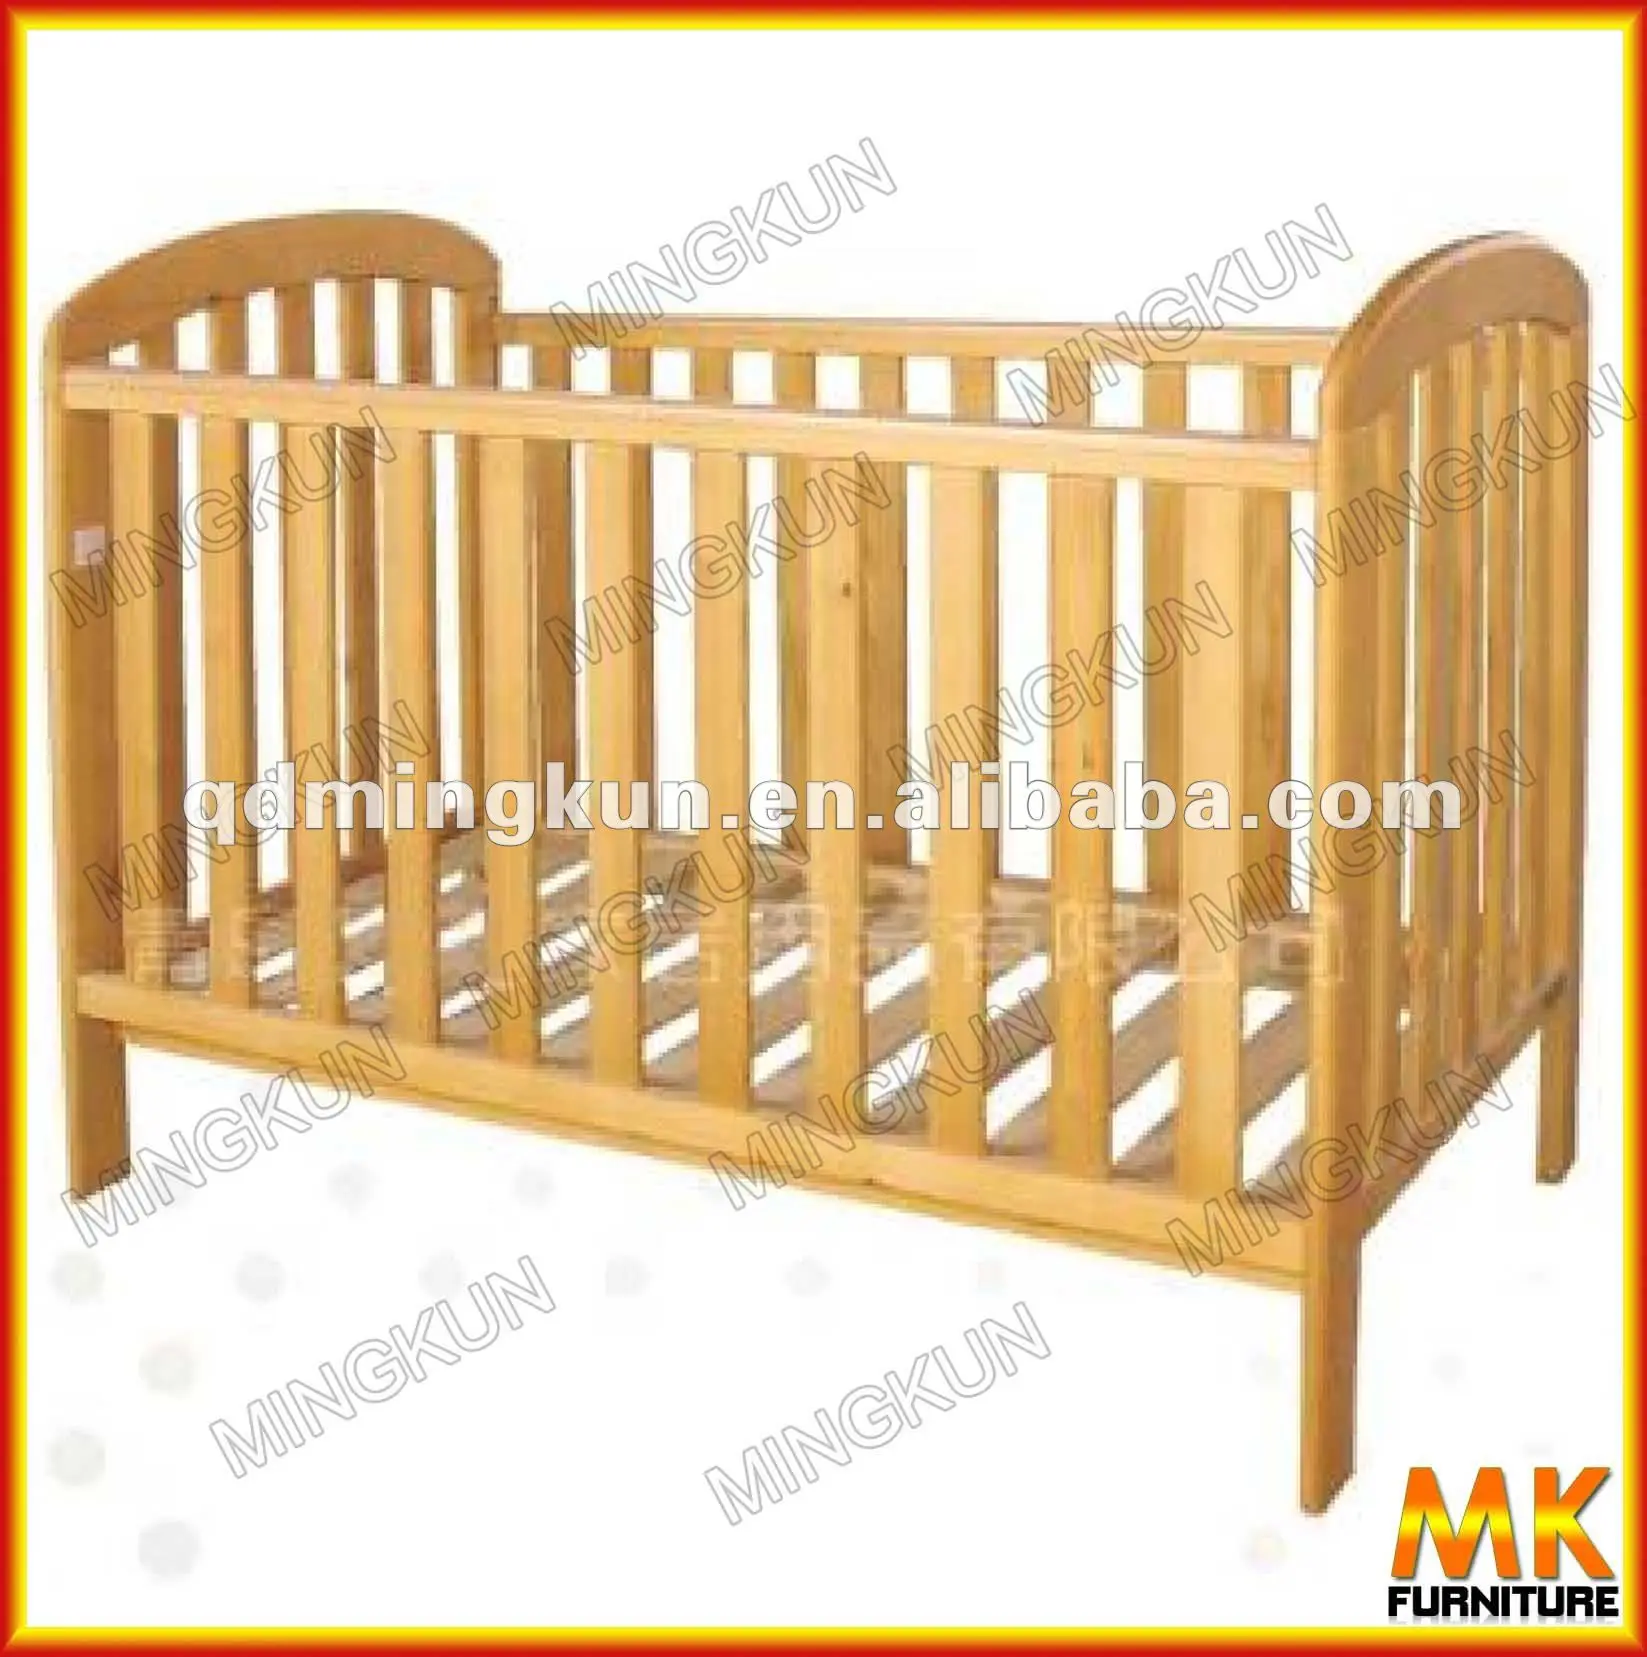 small baby cribs